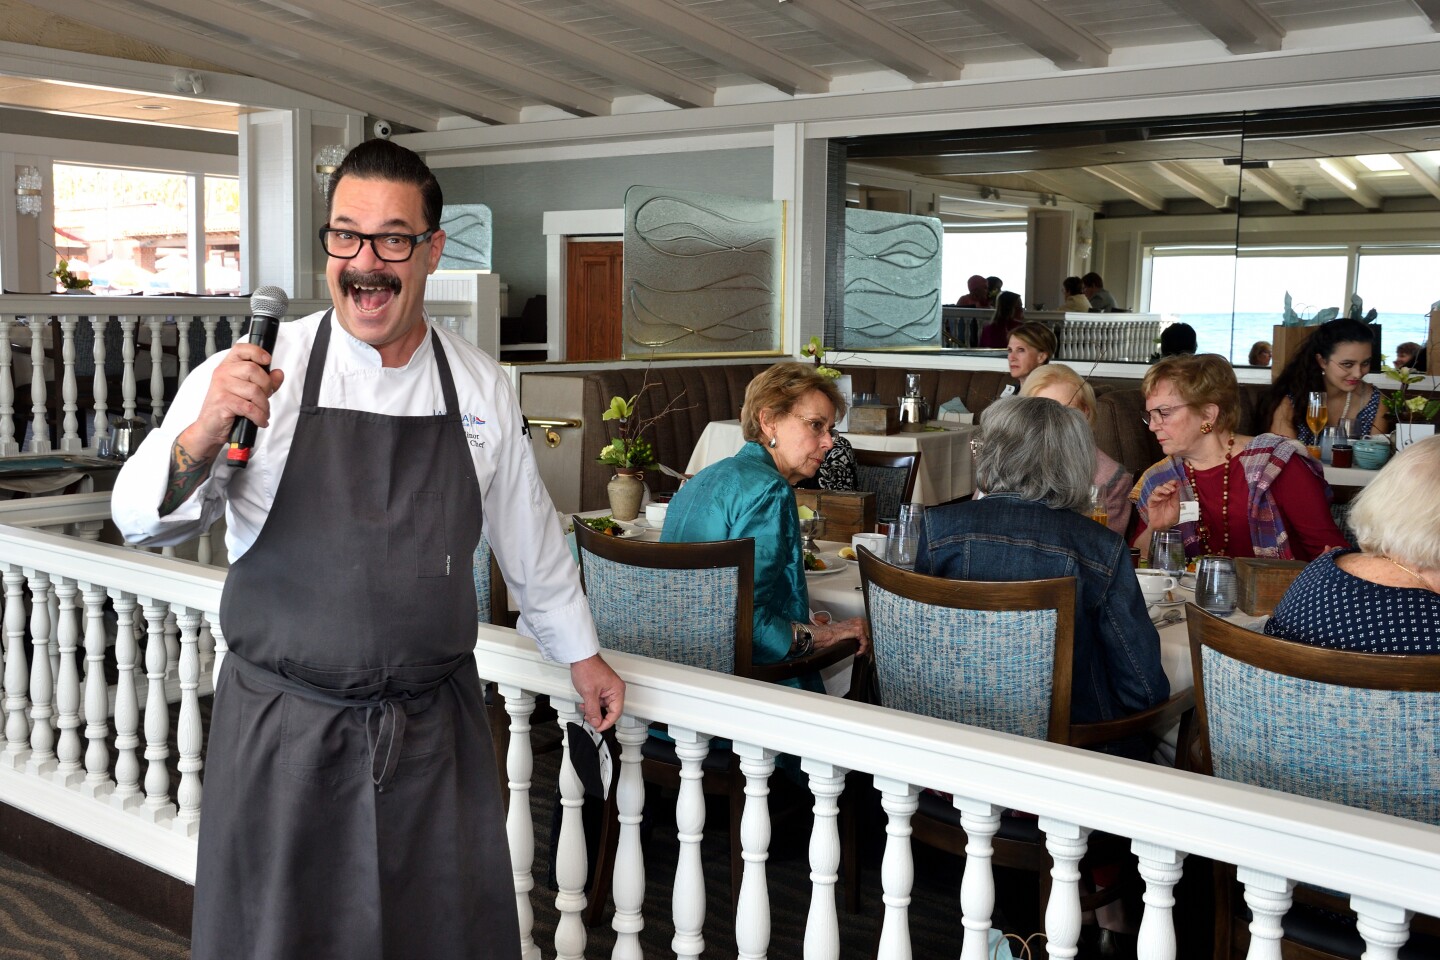 Mike Minor, executive chef of the La Jolla Beach & Tennis Club and its restaurant properties, including The Marine Room